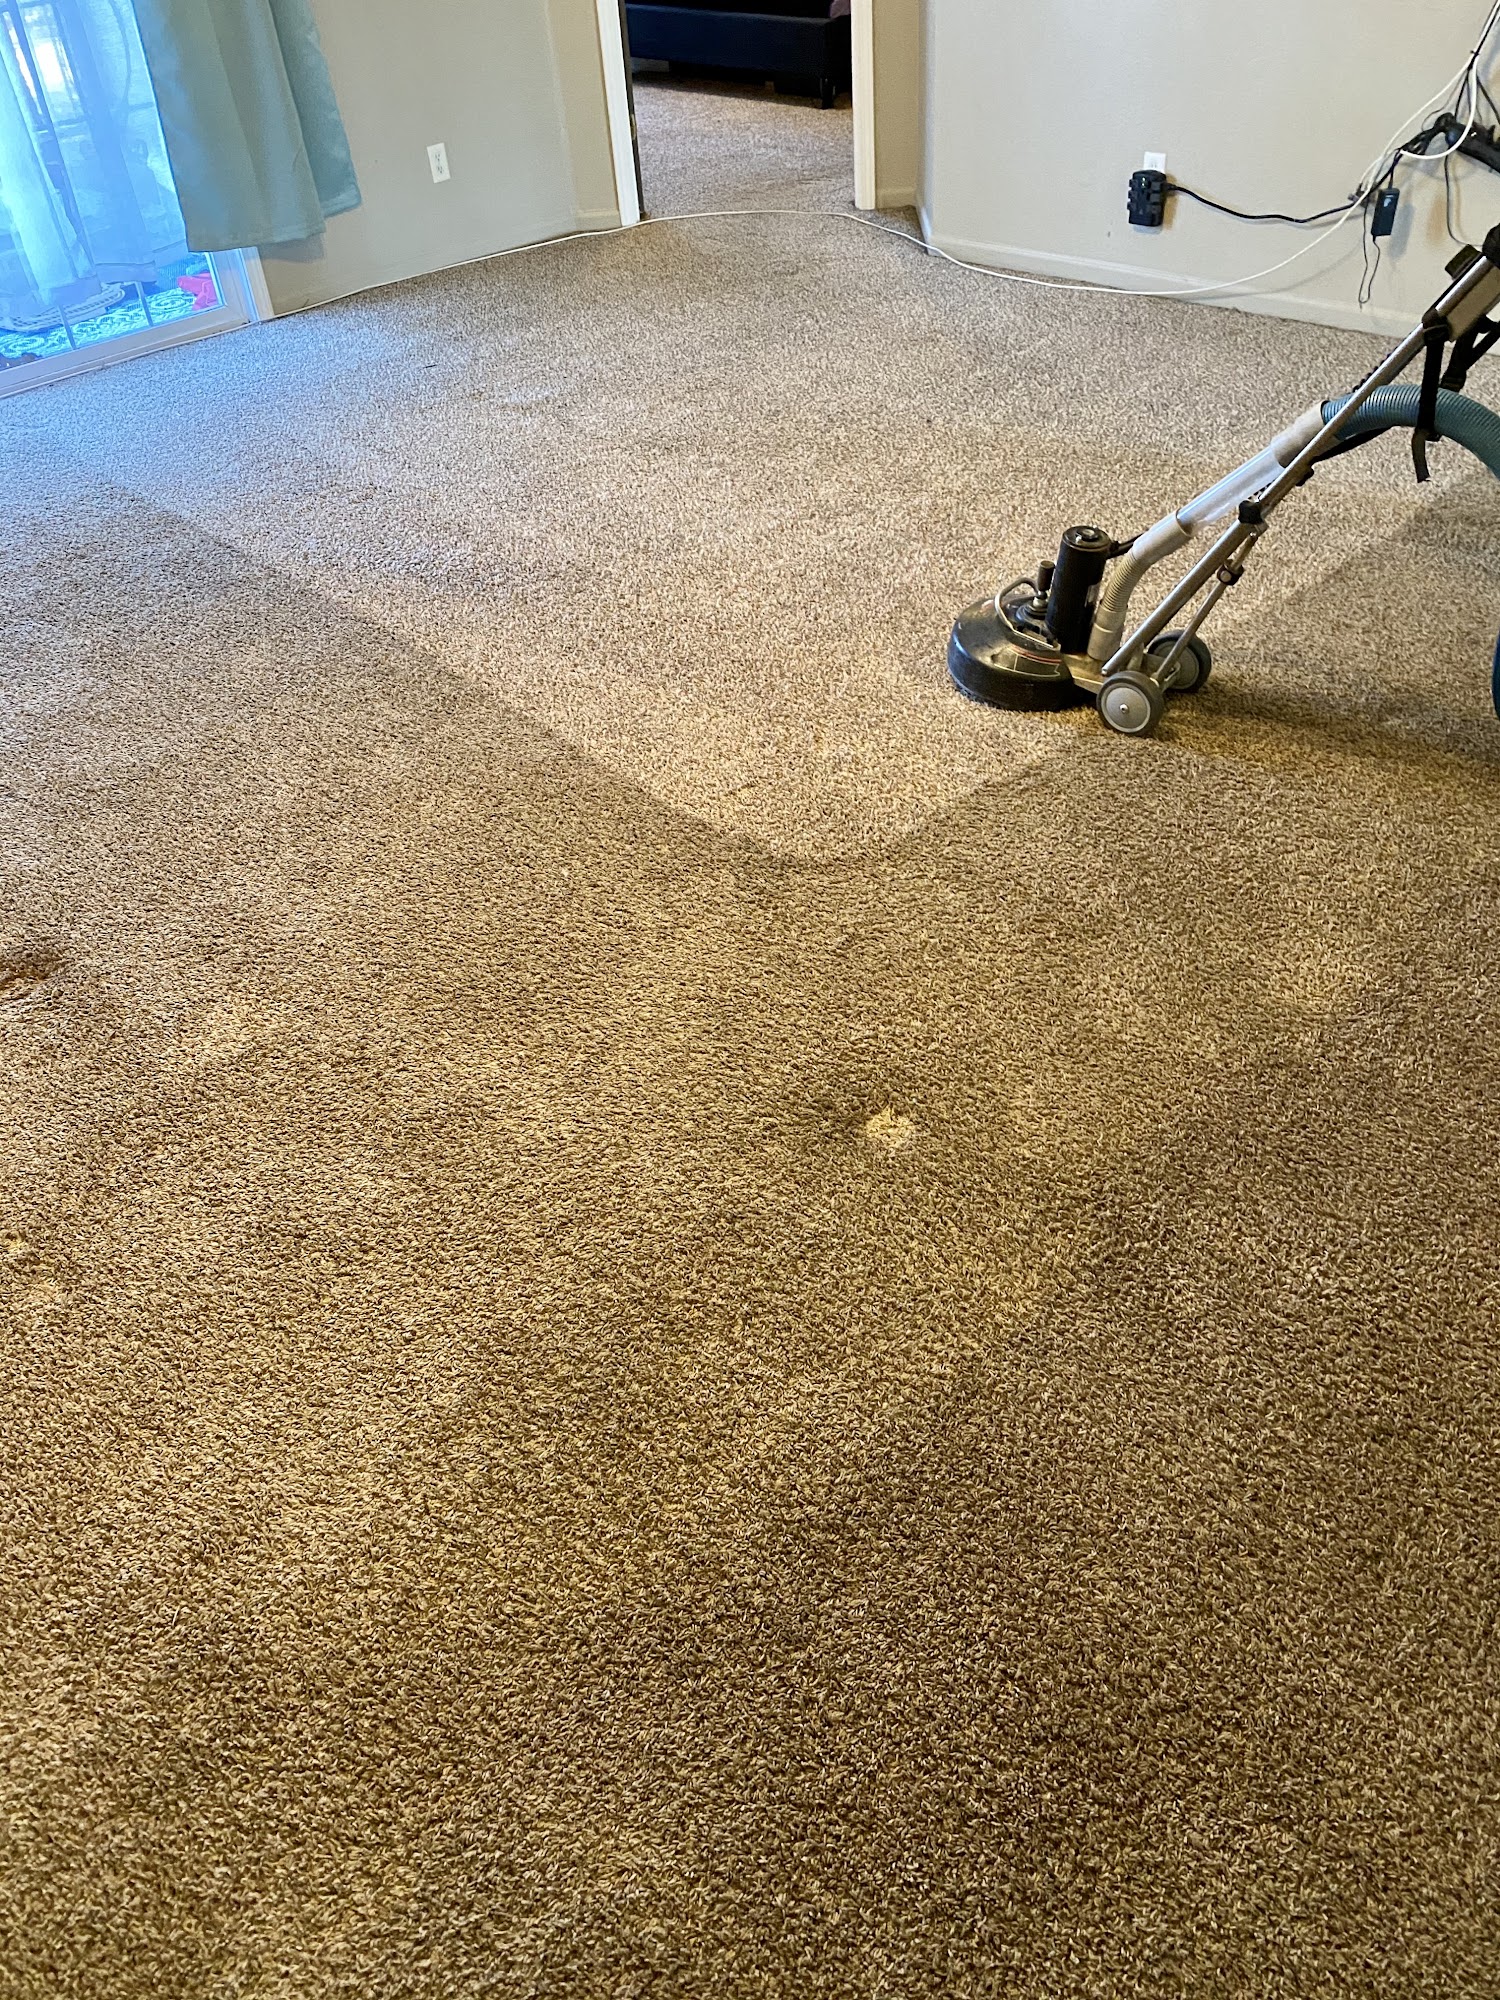 The Lake Carpet Cleaning